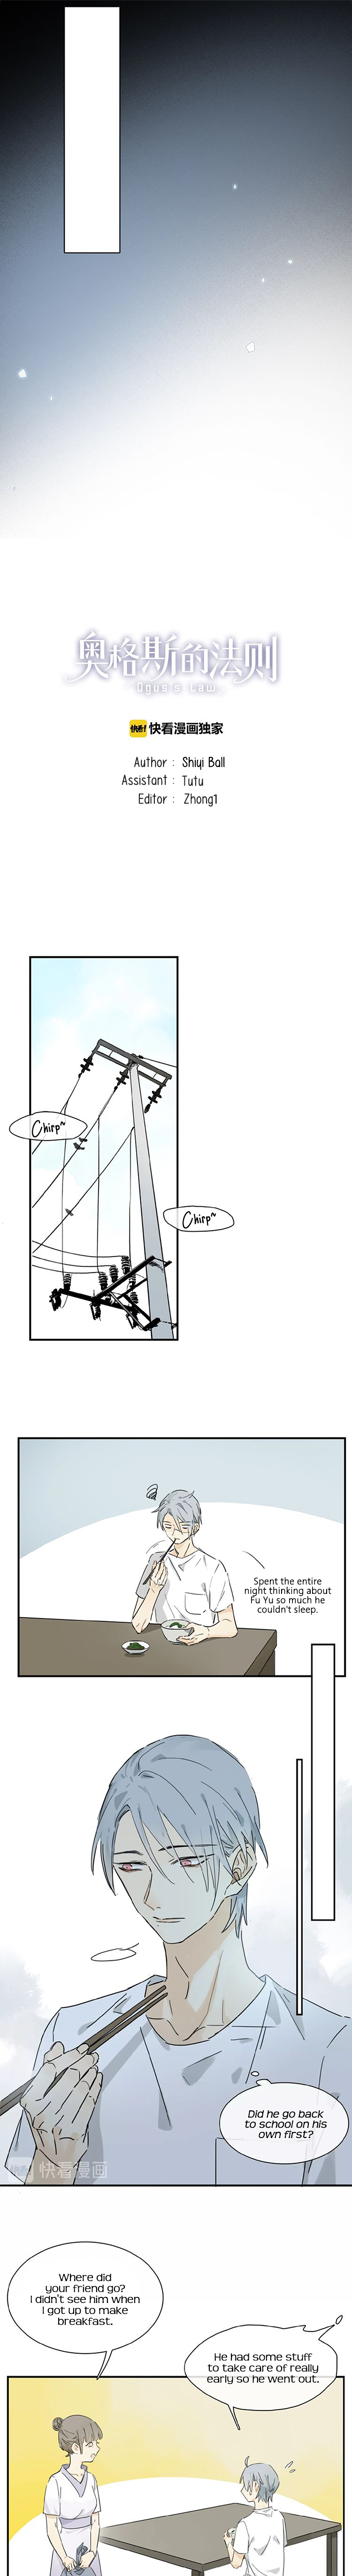 Augs' Law Vol.1 Chapter 20: [Official On Pocket Comics & Webcomics] Thinking About Relying... - Picture 2